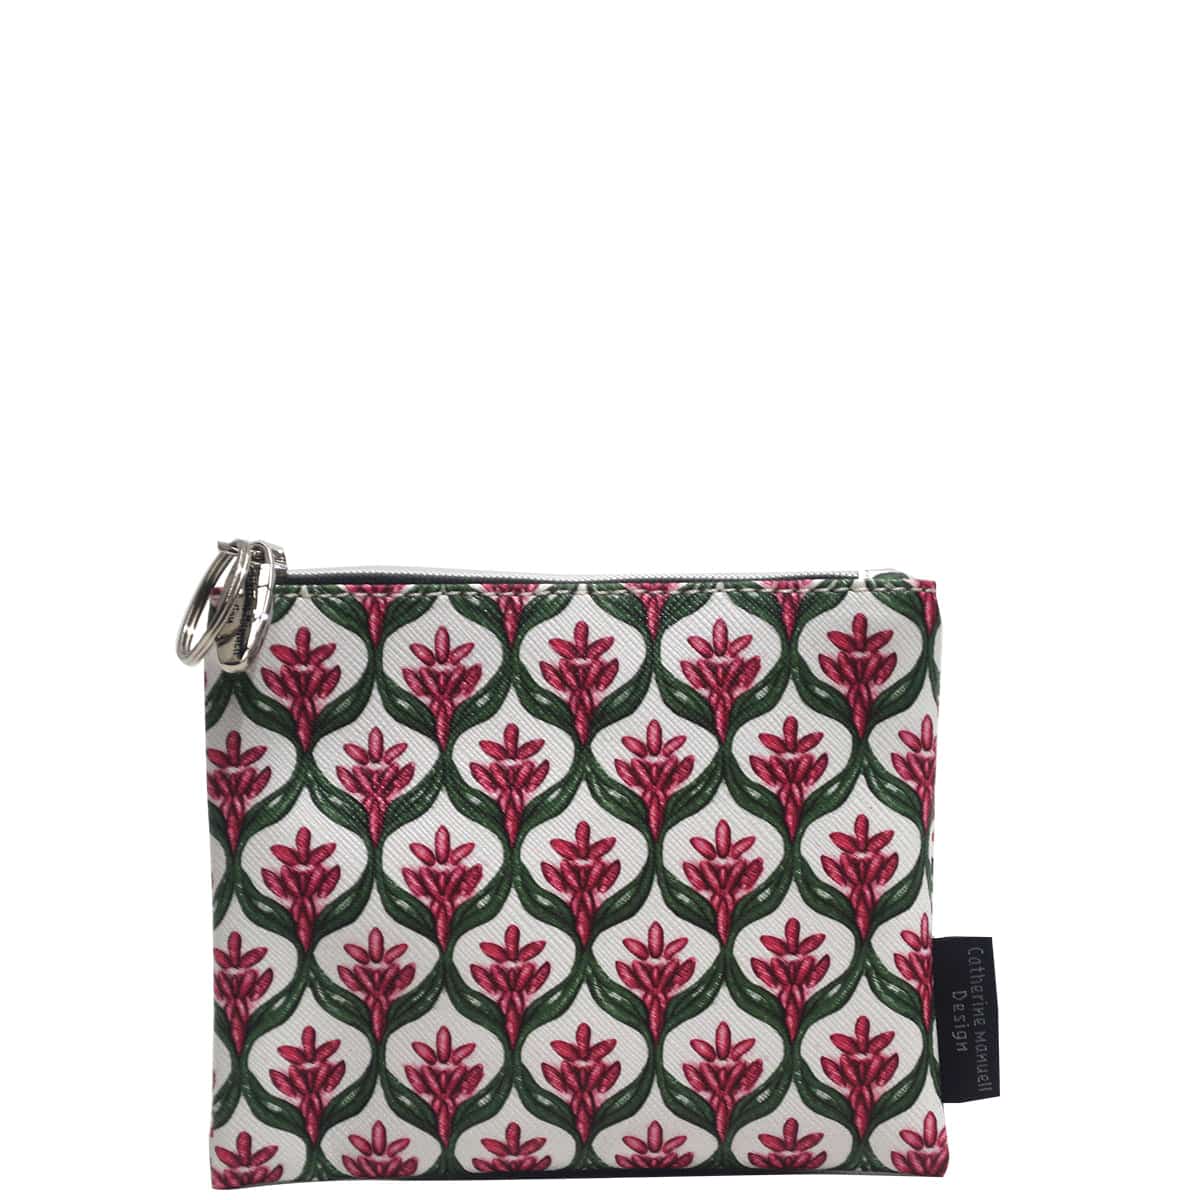 Everyday Purse - French Chateau Green Pink